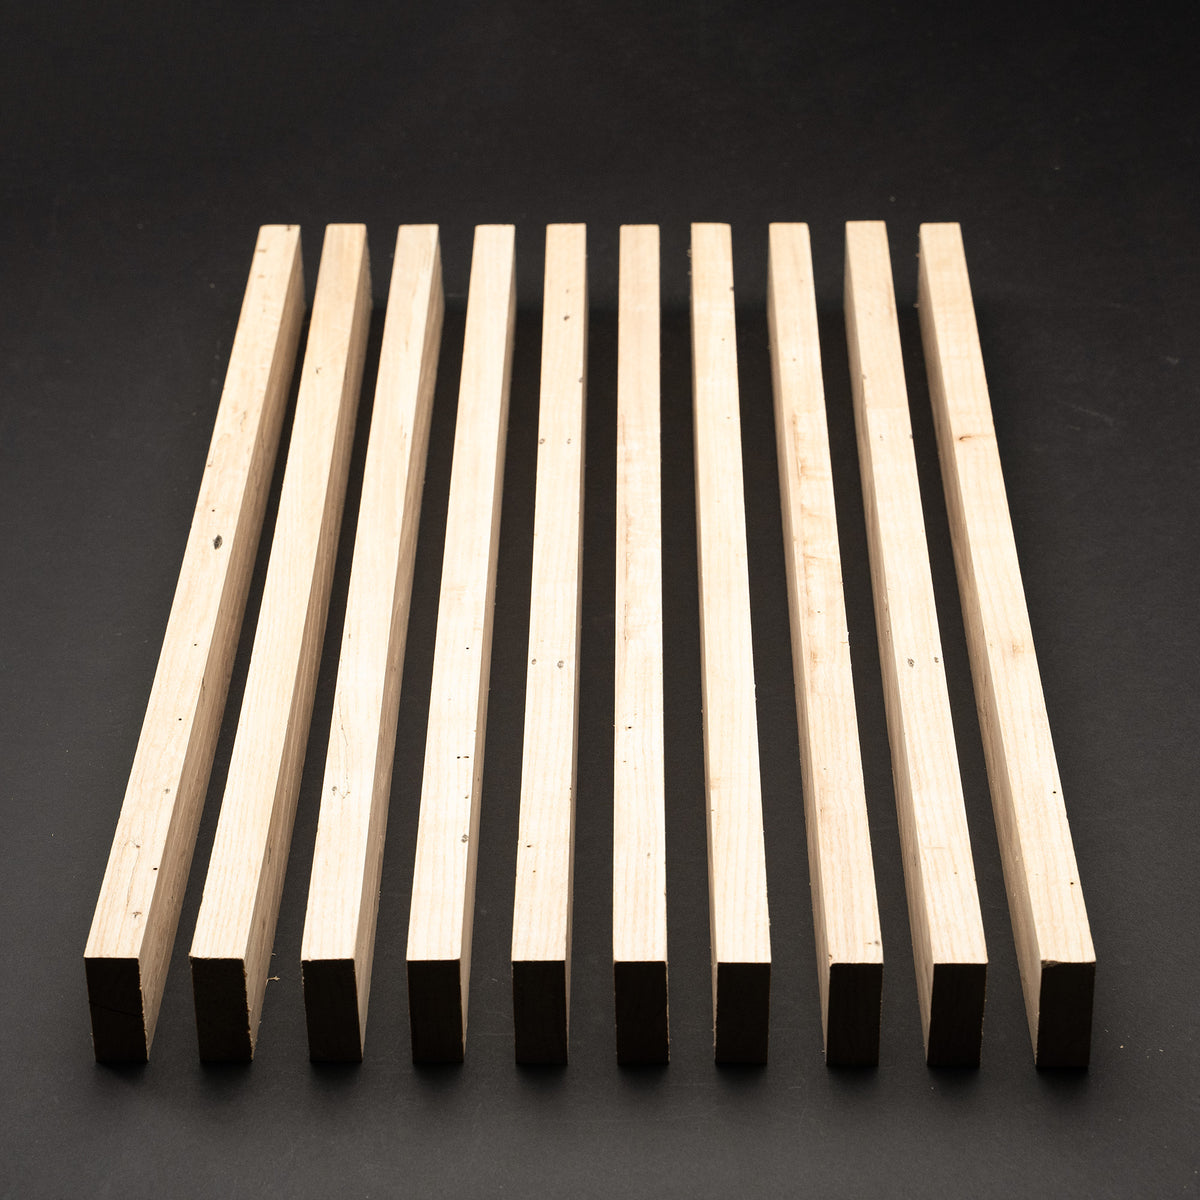 3/4&quot; x 2&quot; x 24&quot; White Ash Boards - Pack of 5, 10, 15 or 20 - DIY Cutting Charcuterie Cheese Boards Tray - Kiln Dried